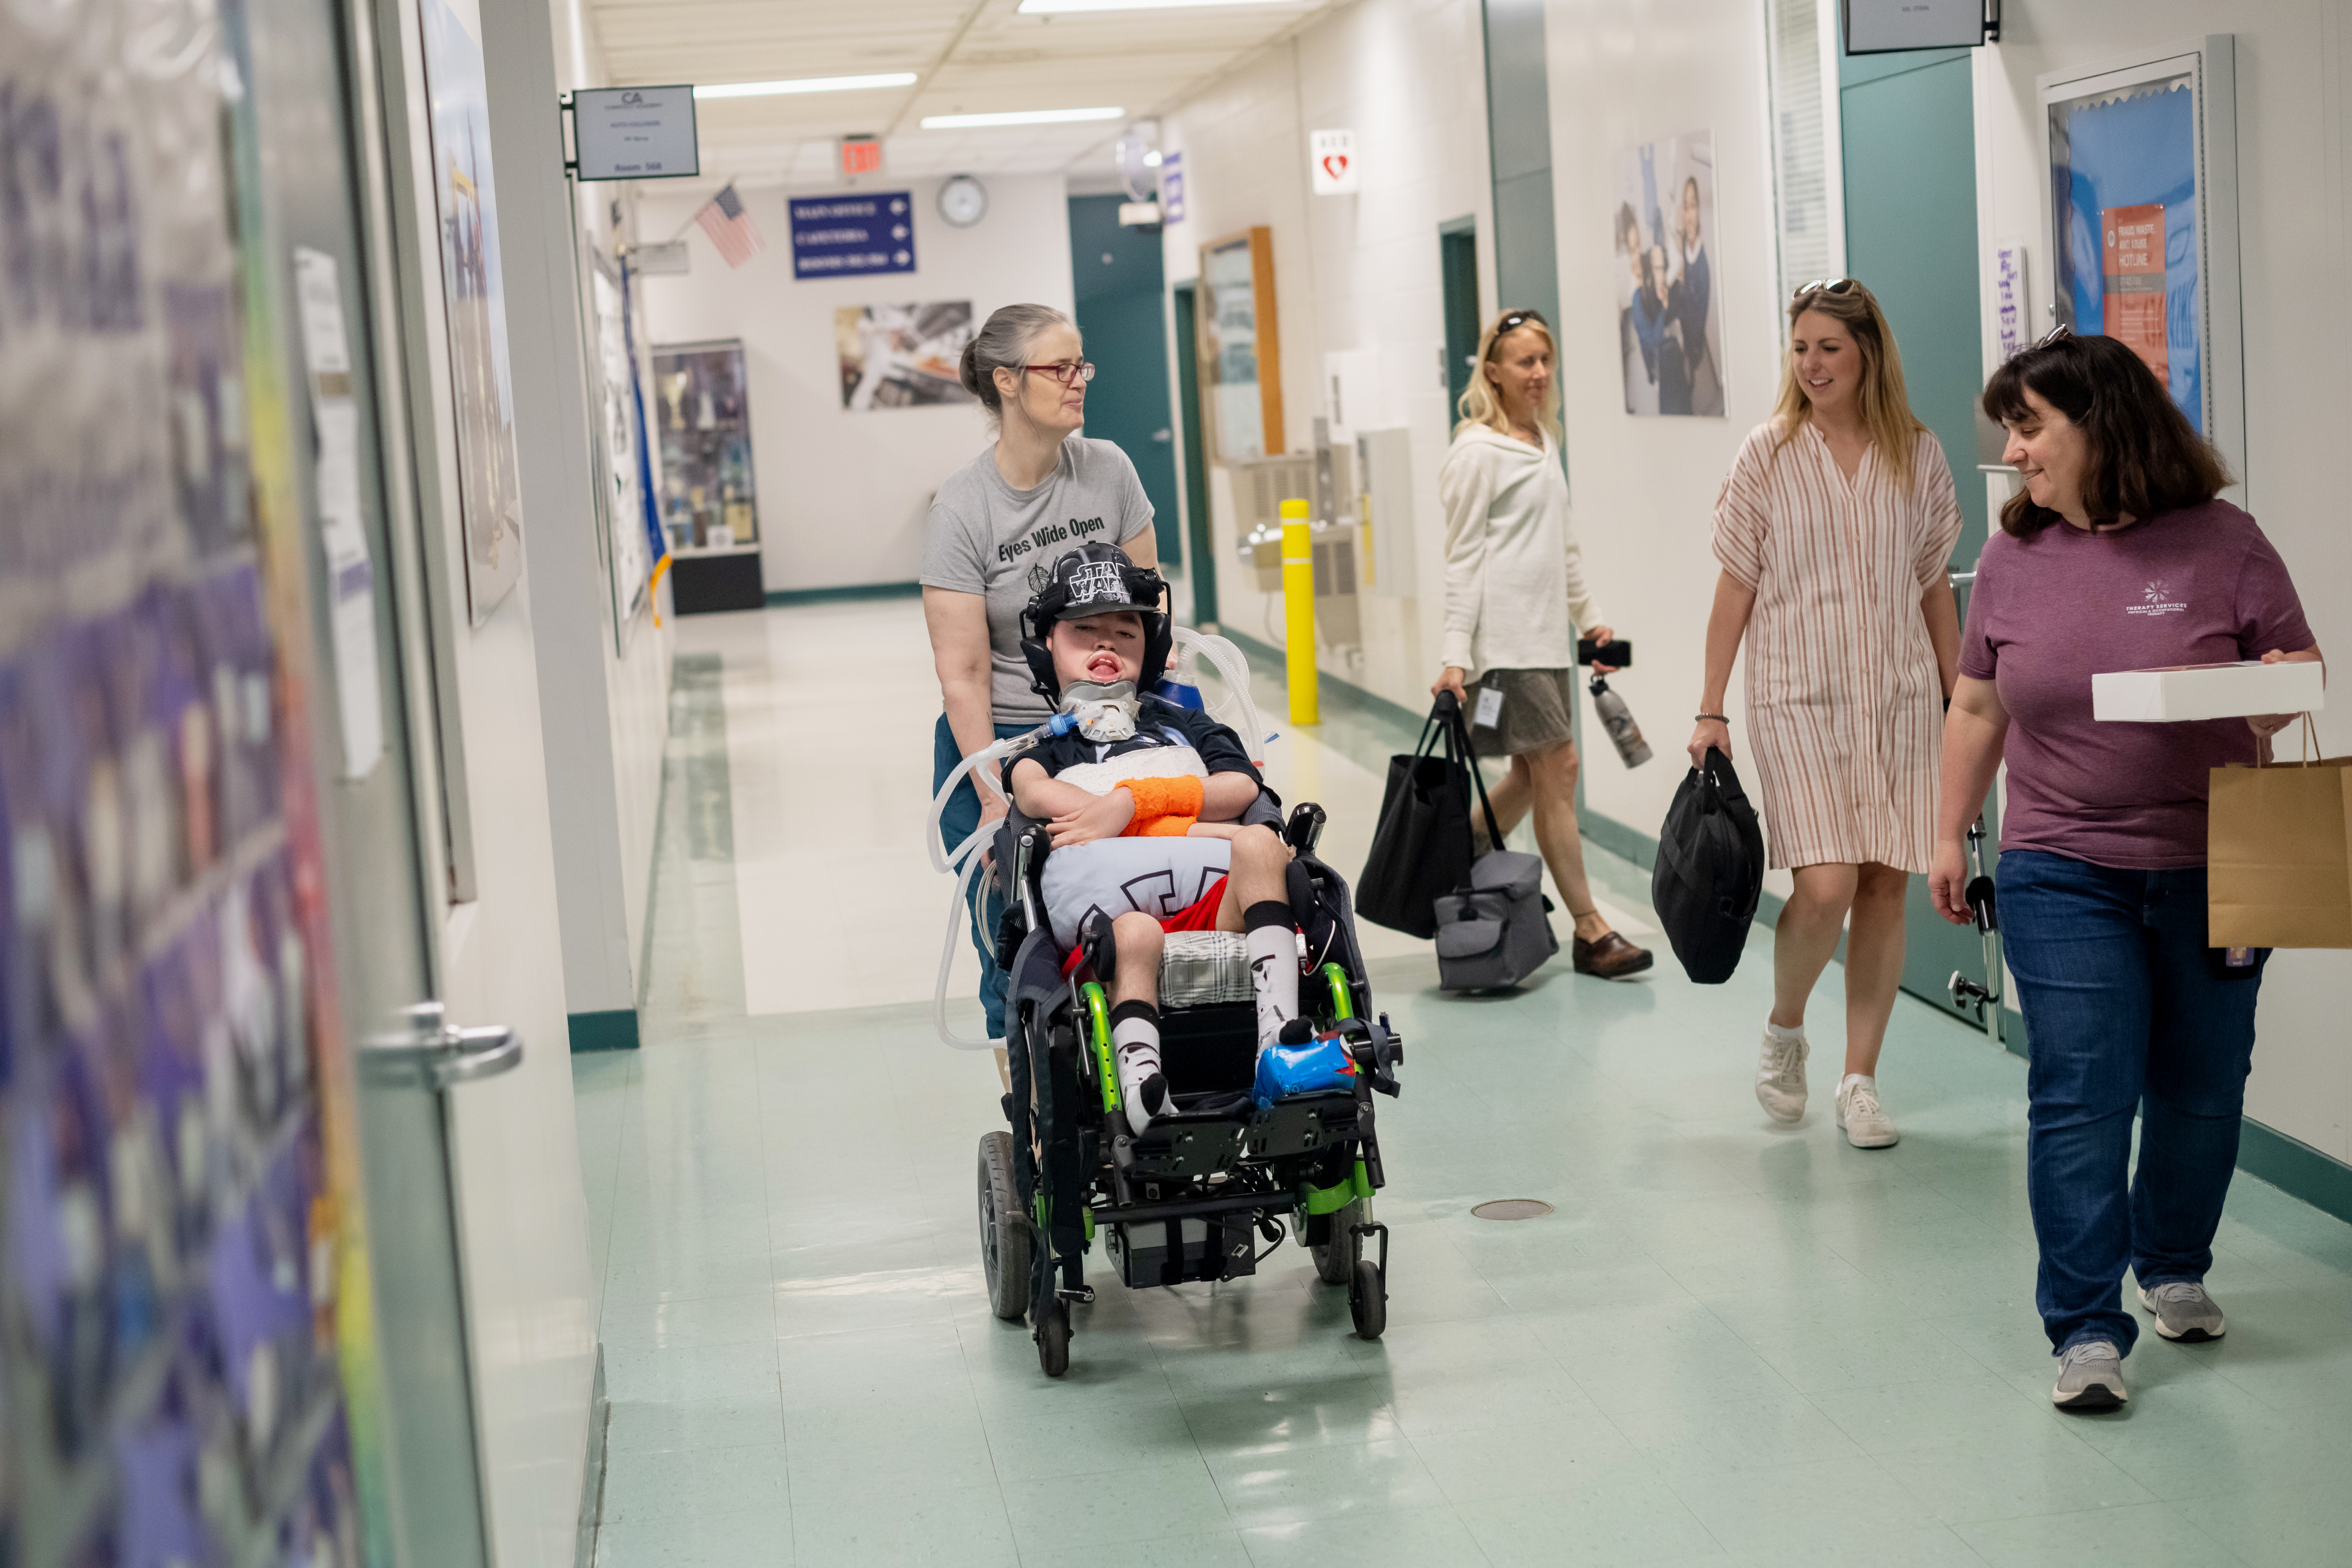 Jamie Bruen pushes his son, Liam, into Chantilly Academy. Three FCPS staff members smile and walk alongside his wheelchair.